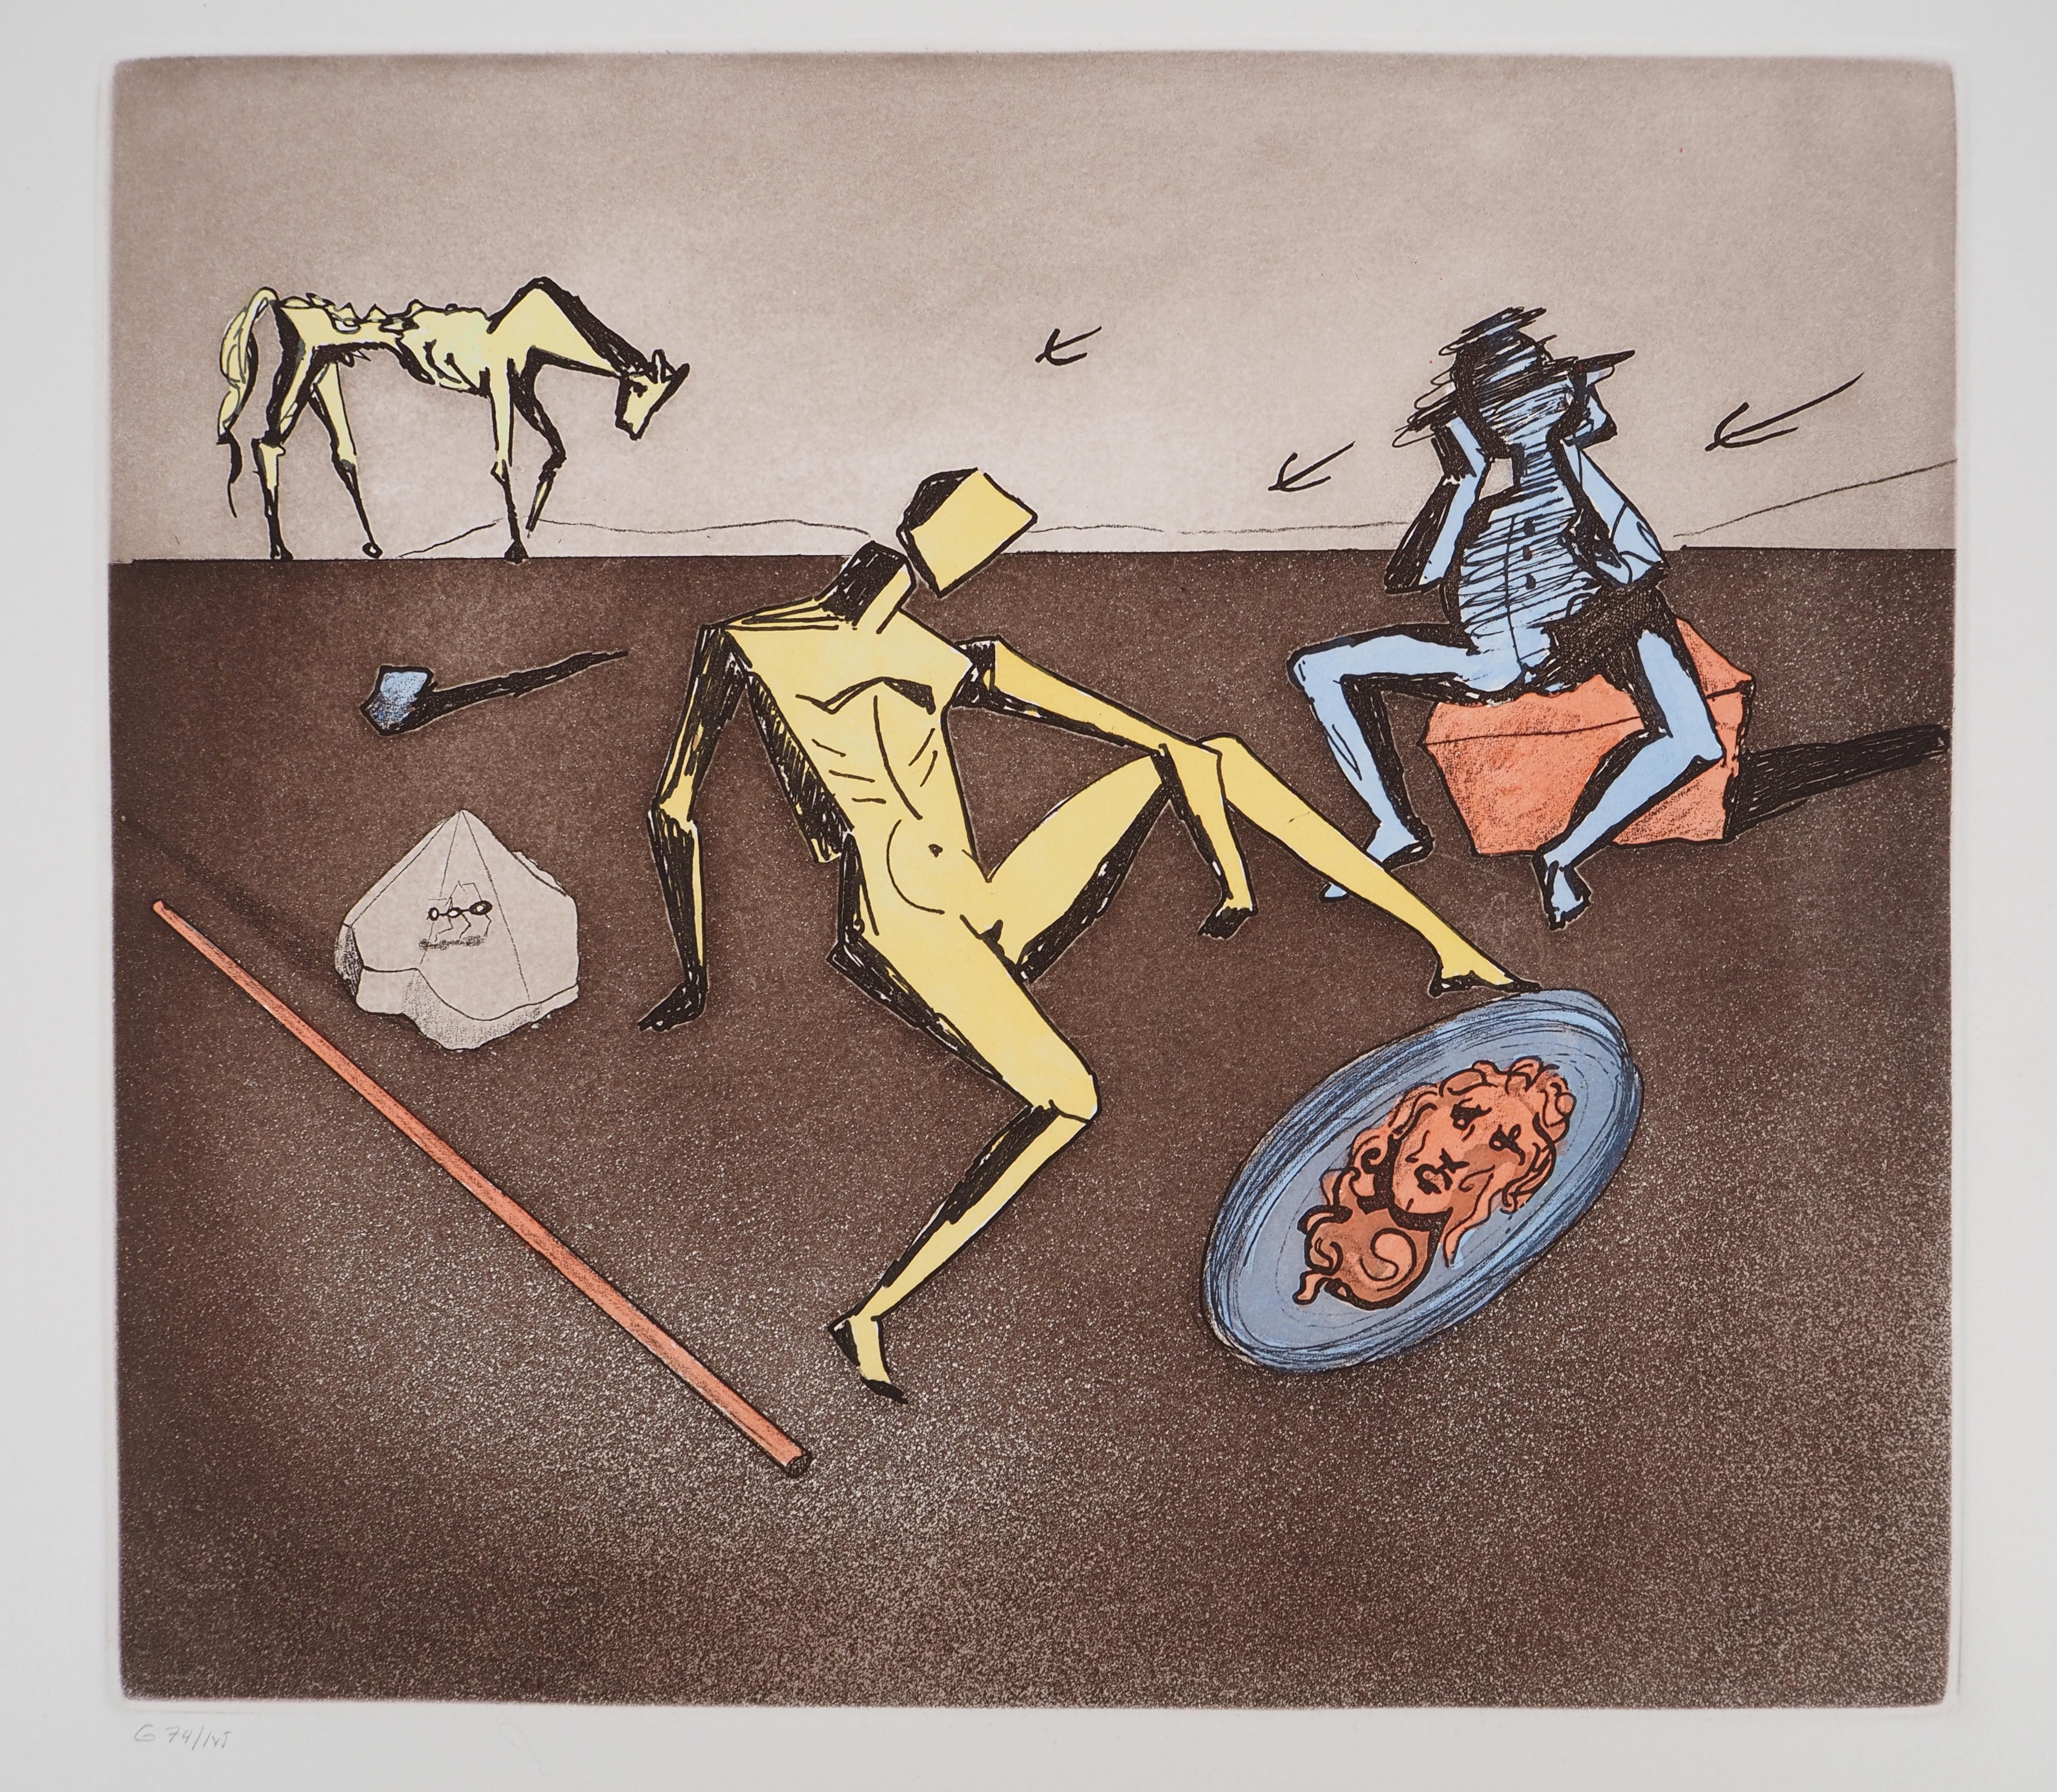 Don Quijote : Mirror of Chivalry - Original etching, Handsigned (Field #80-1 I) - Surrealist Print by Salvador Dalí